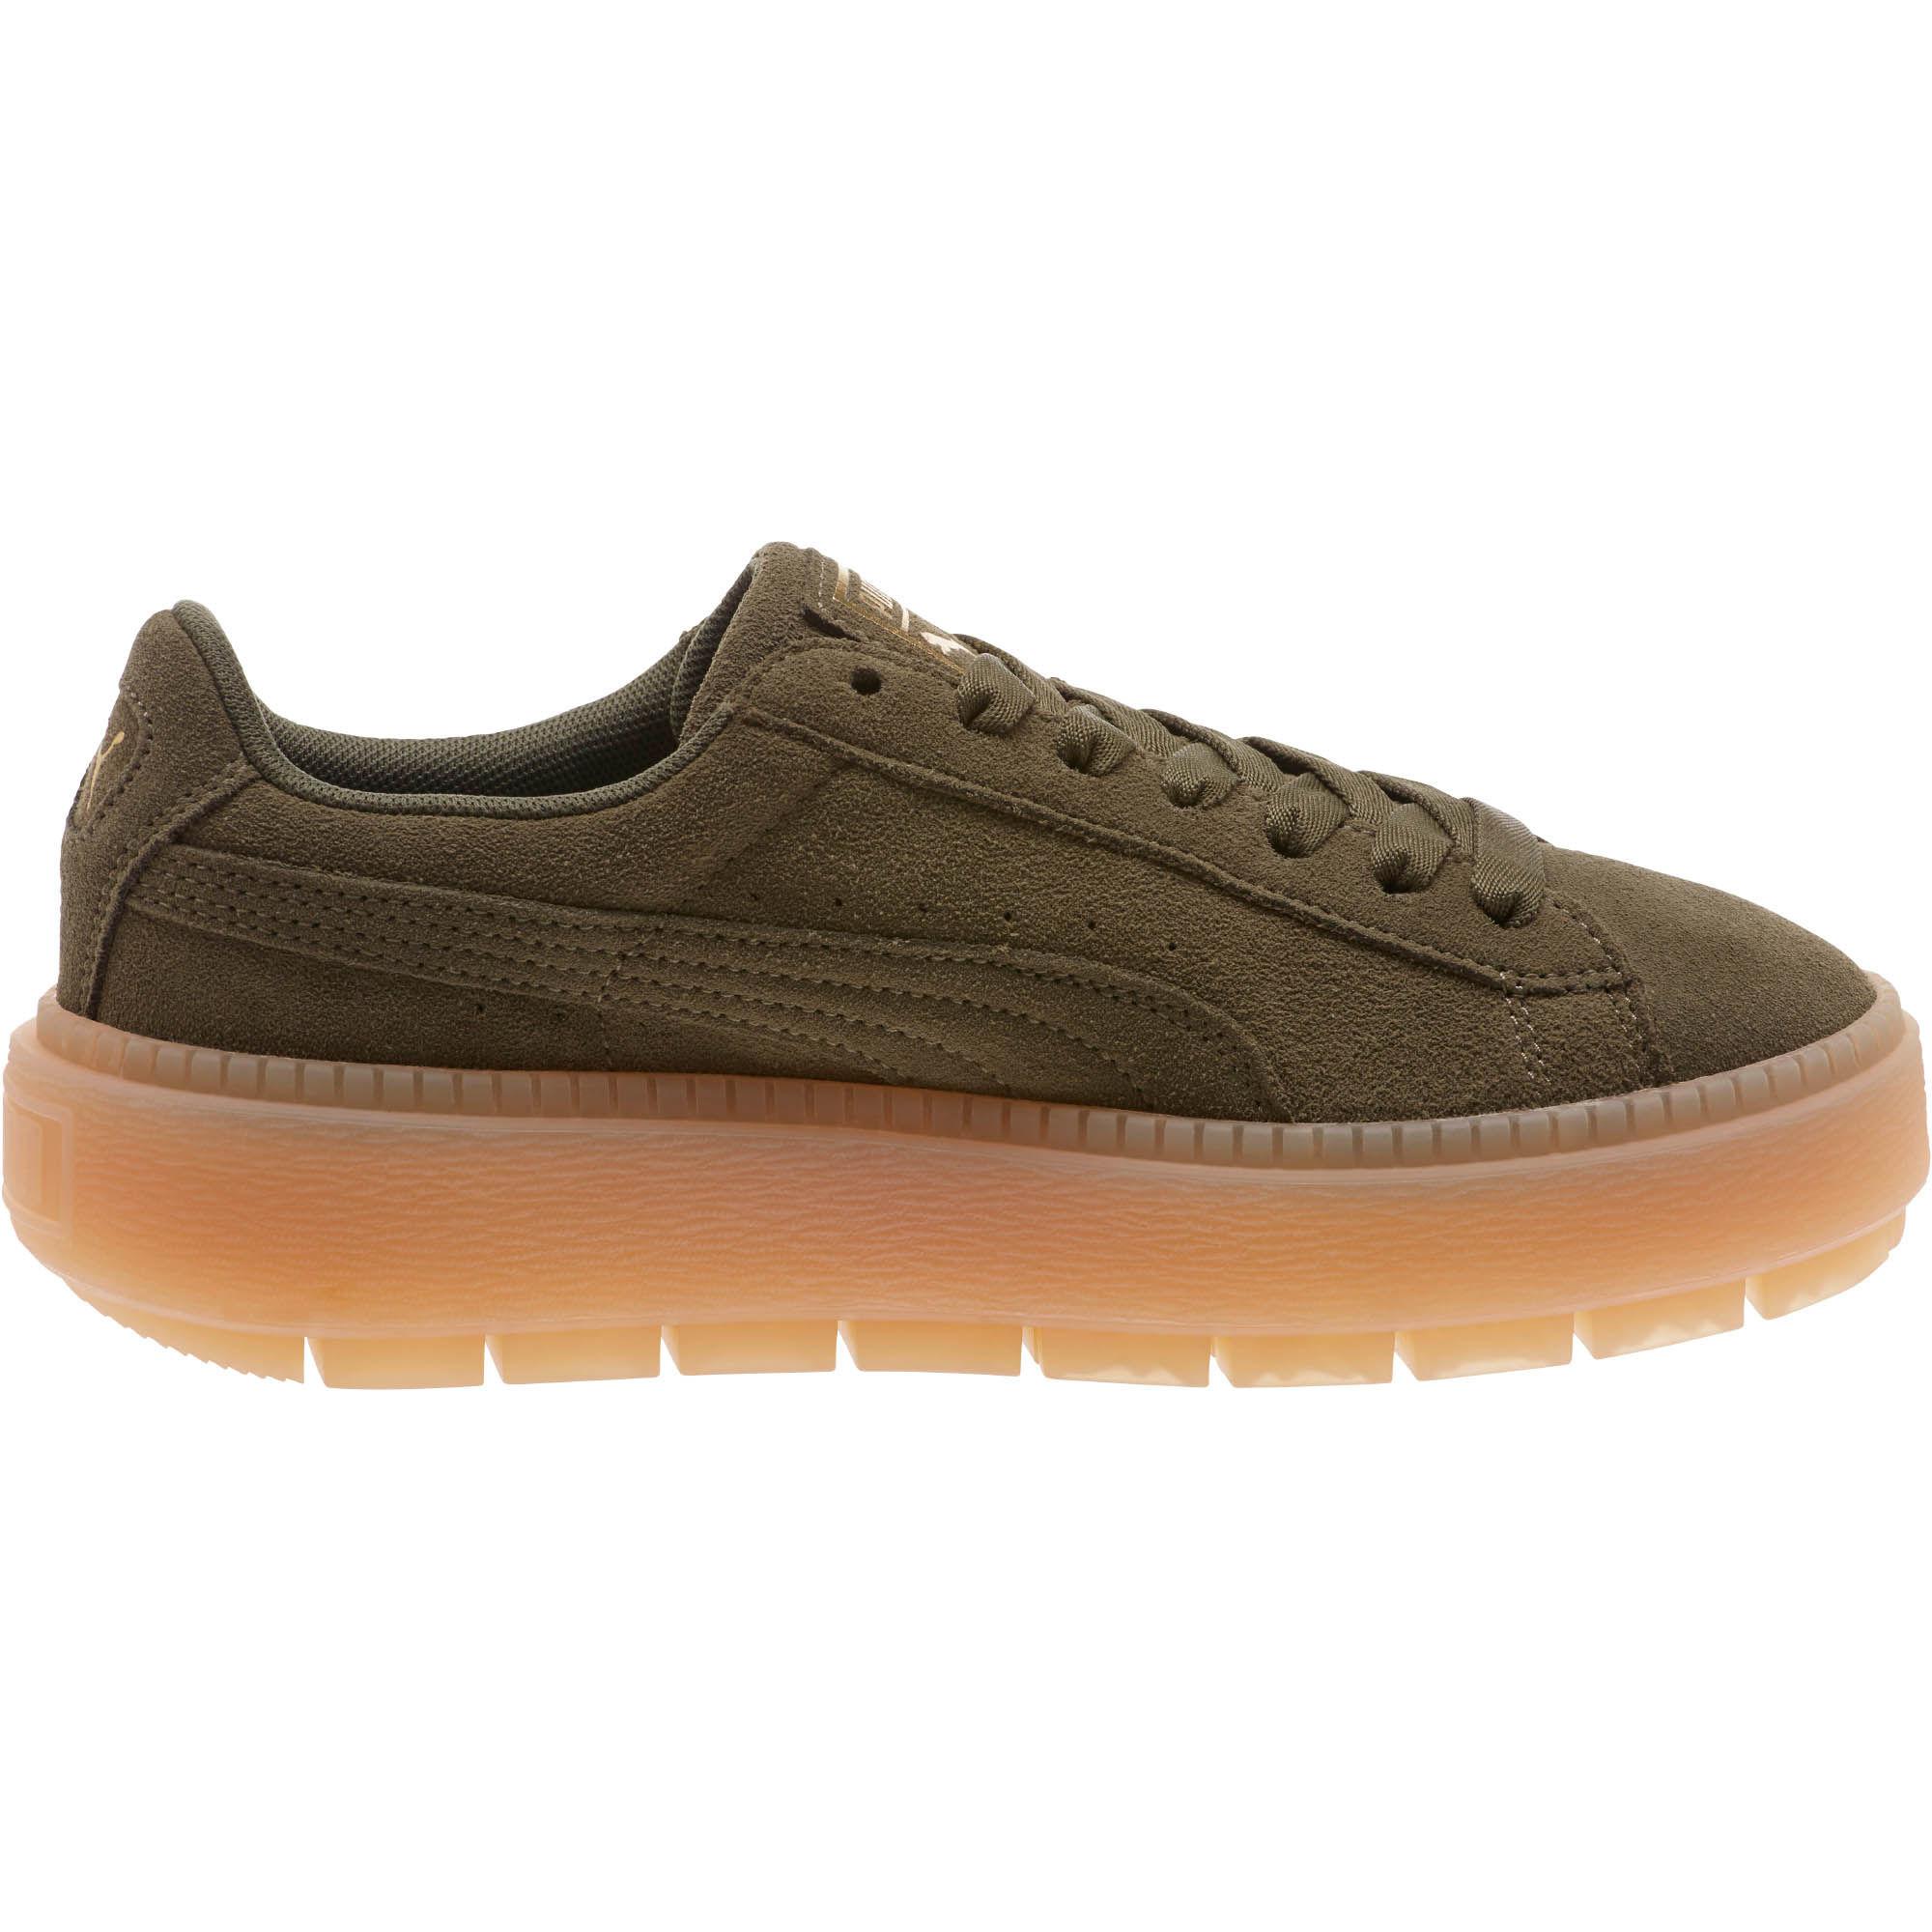 PUMA Suede Platform Trace Women's Sneakers in Olive Night (Green) - Lyst